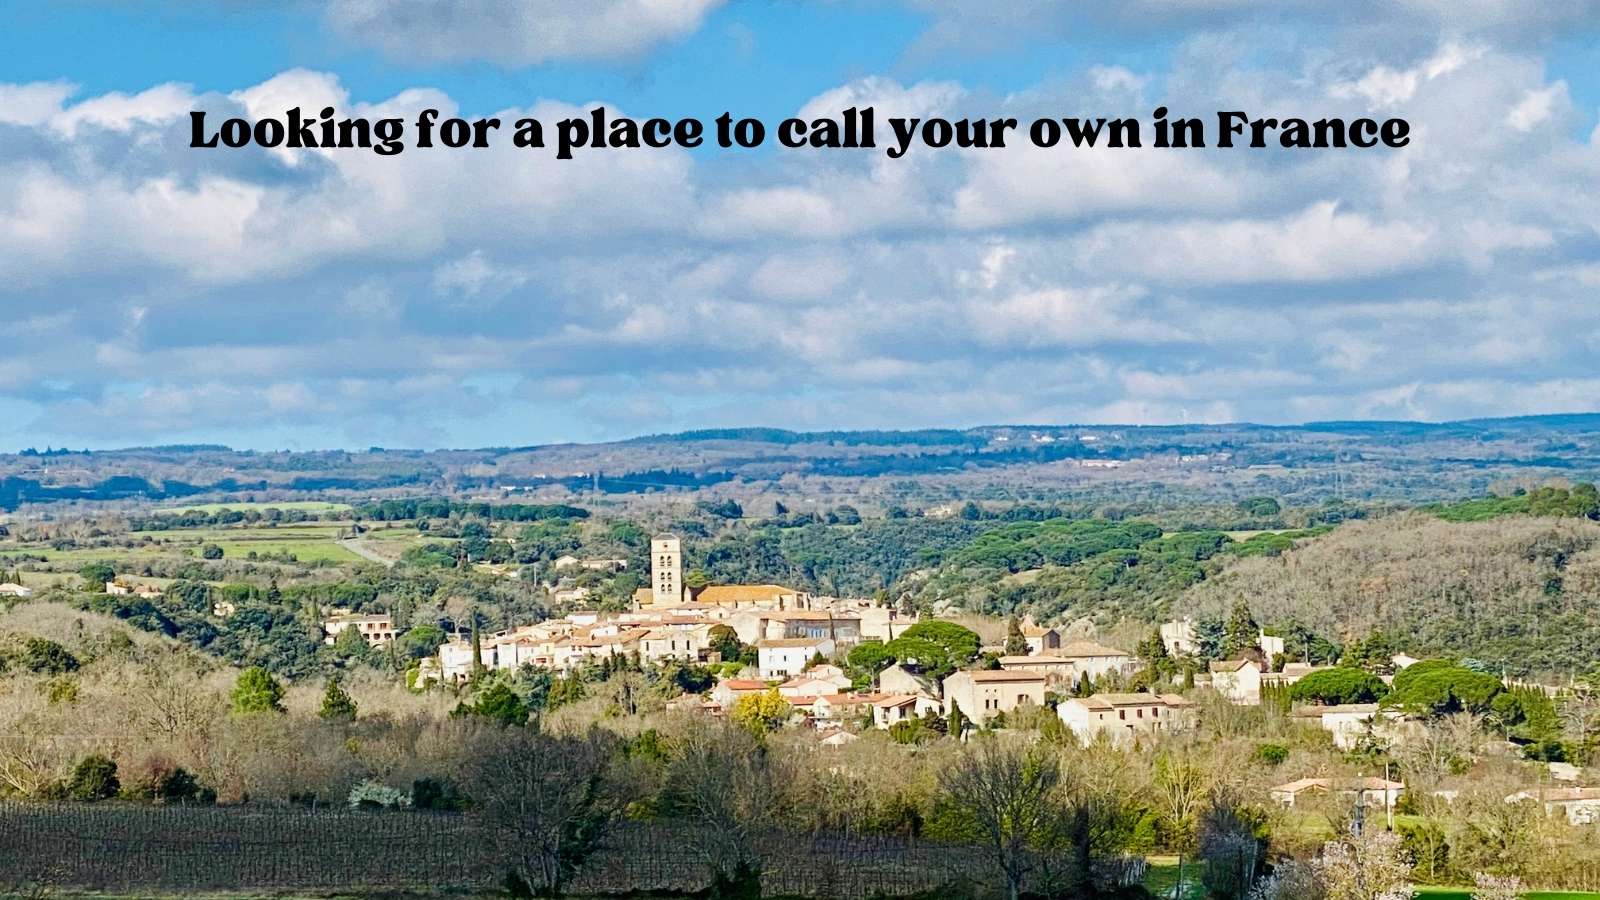 The village of Montolieu at a distance: Looking for a place to call your own in France